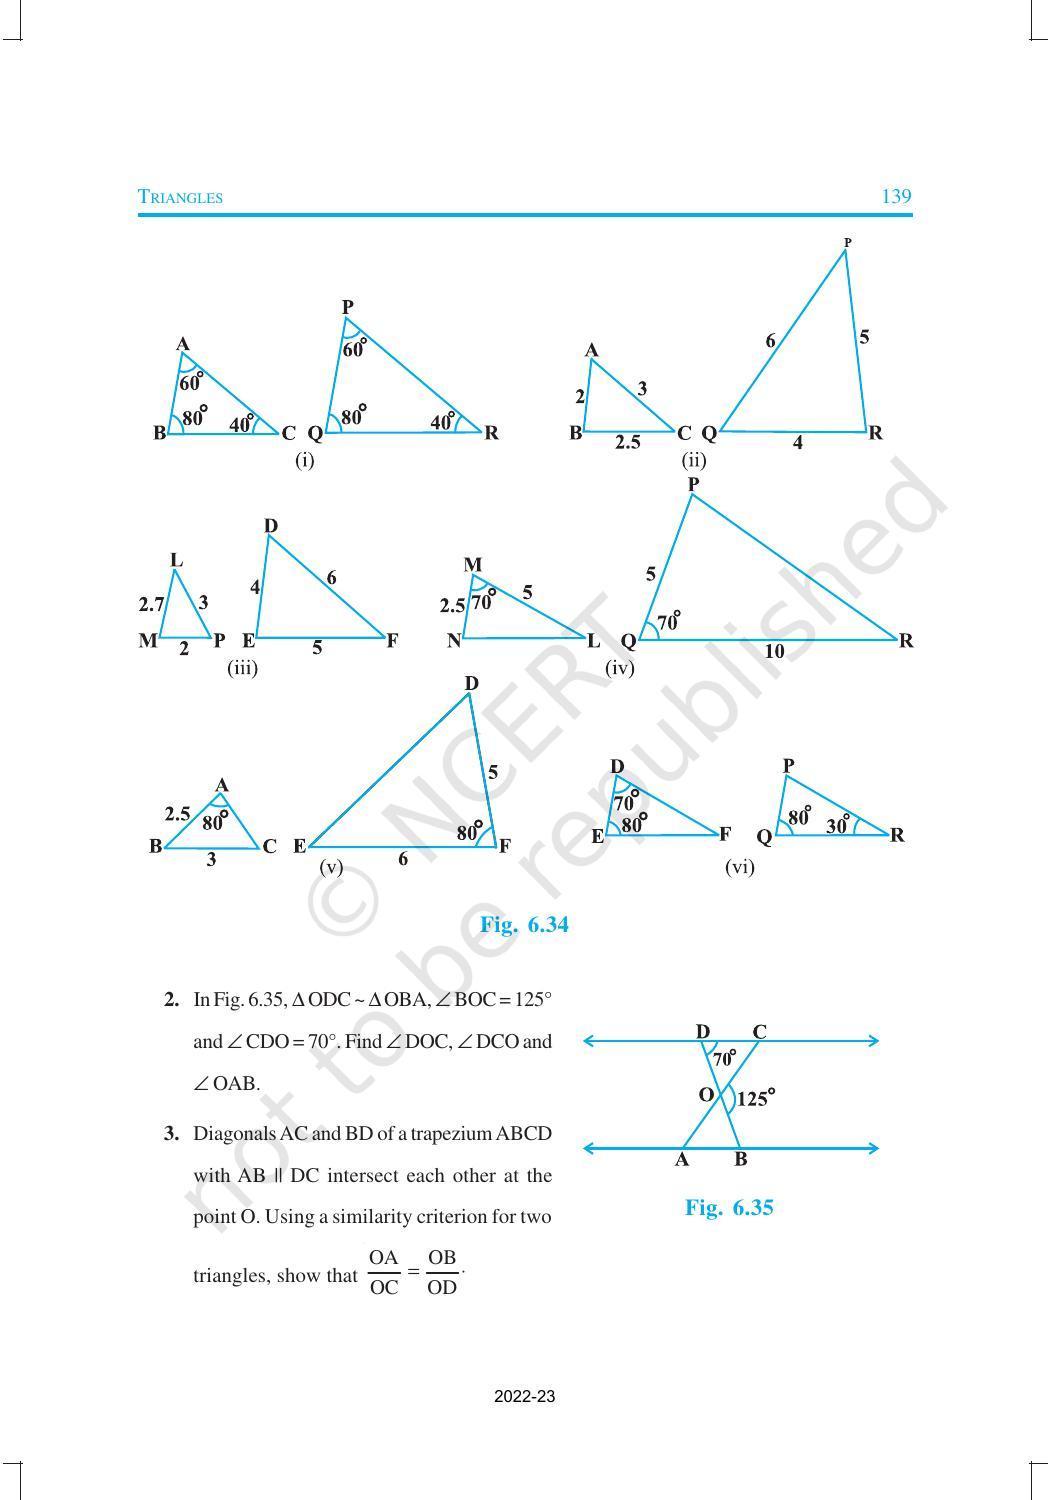 NCERT Book for Class 10 Maths Chapter 6 Triangles - Page 23